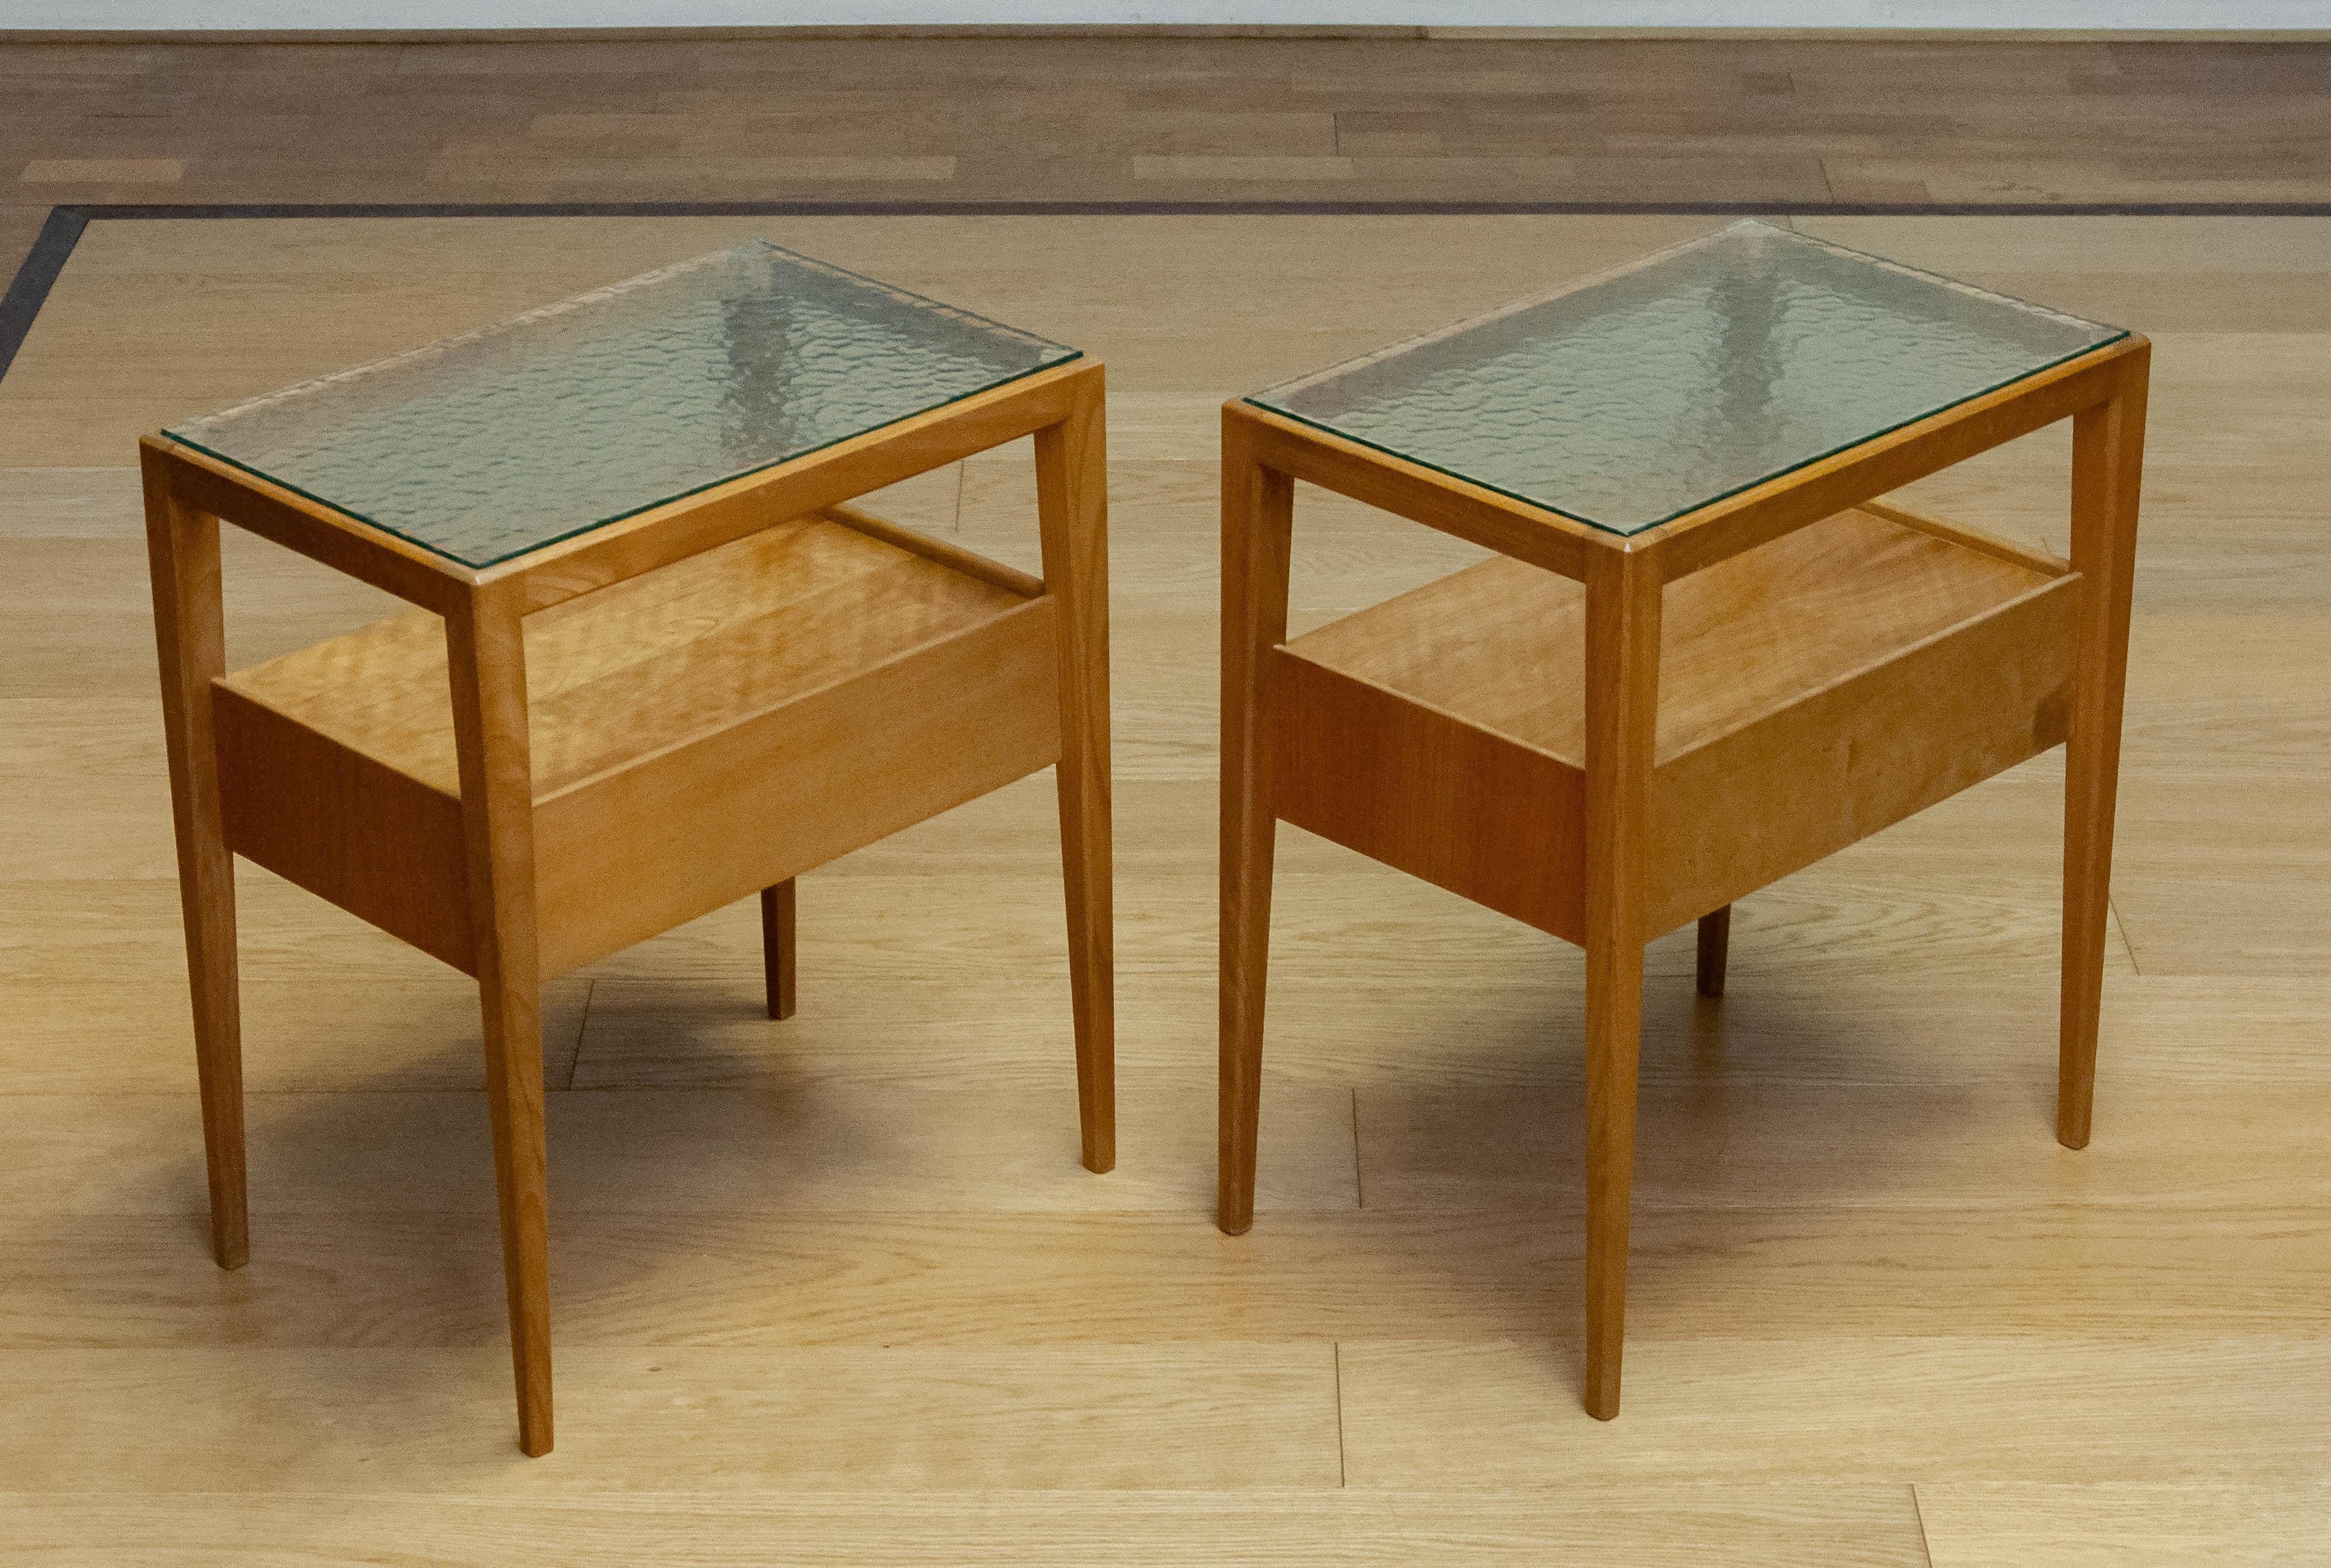 Mid-20th Century 1950s Pair Bedside Tables In Elm With Glass Top By Carl-Axel Acking For Bodafors For Sale